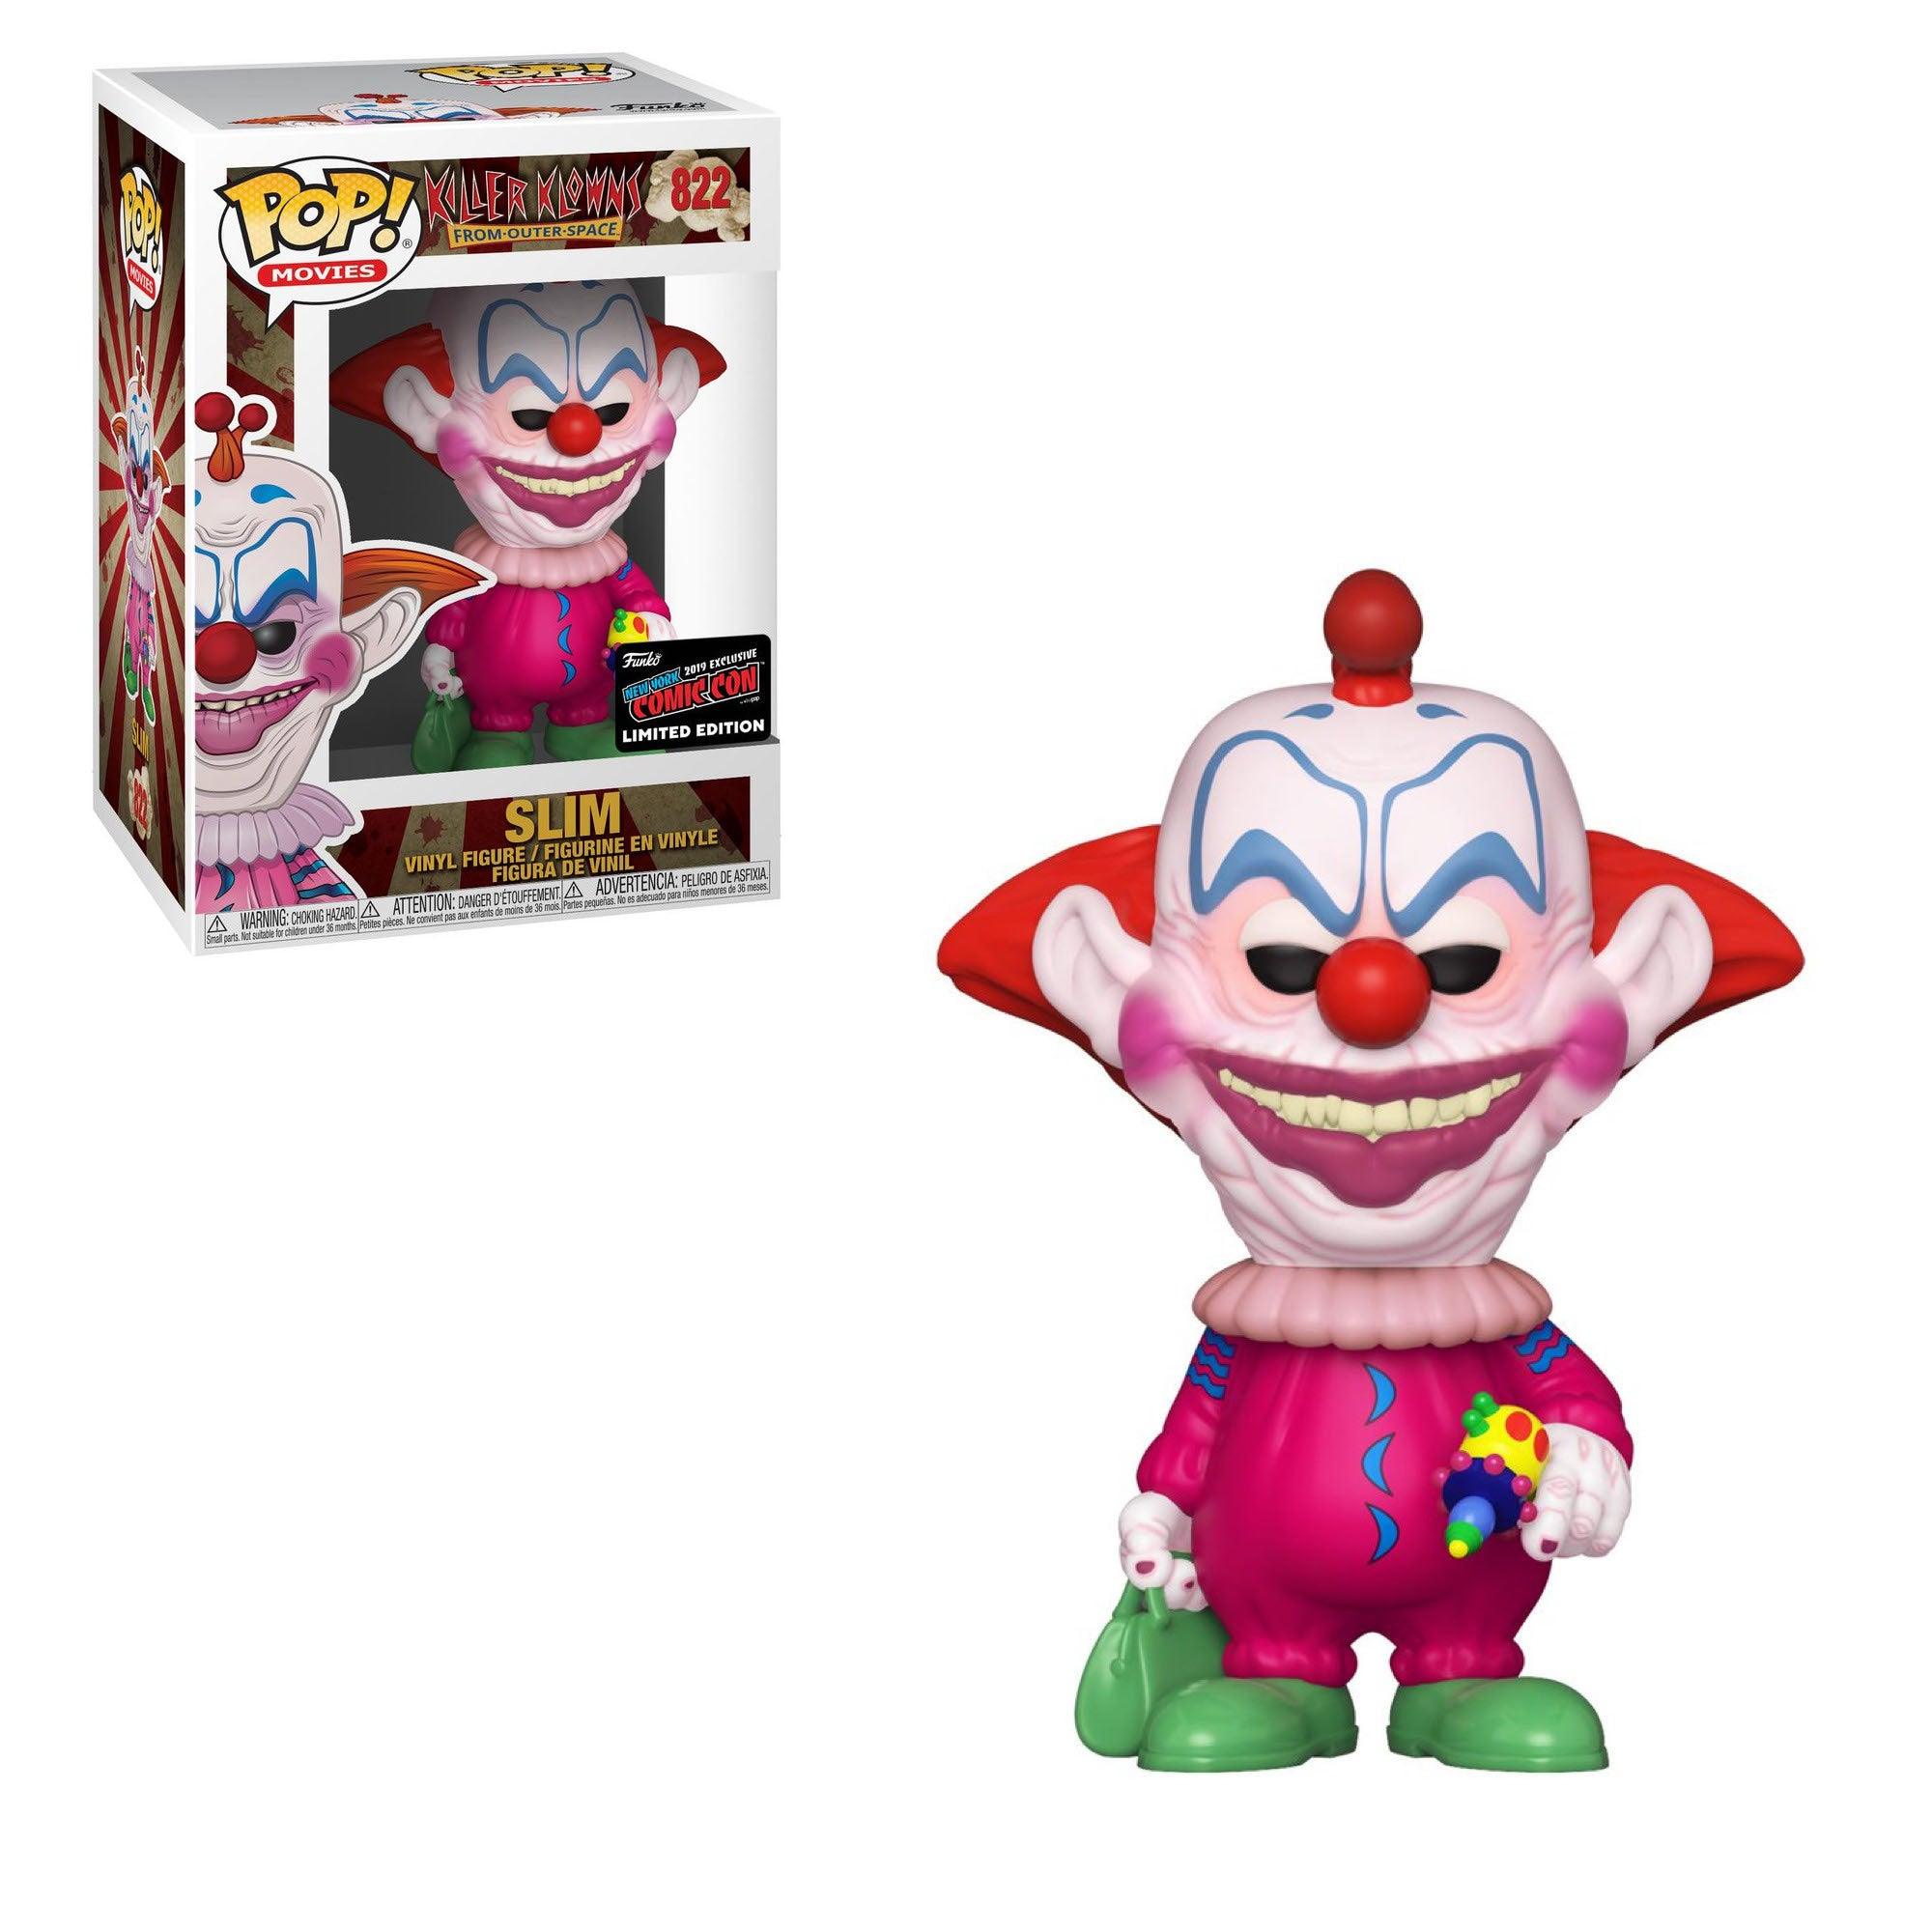 Pop! Movies - Killer Klowns From Outer Space - Slim - #822 -2022 New York Comic Con LIMITED Edition EXCLUSIVE - Hobby Champion Inc